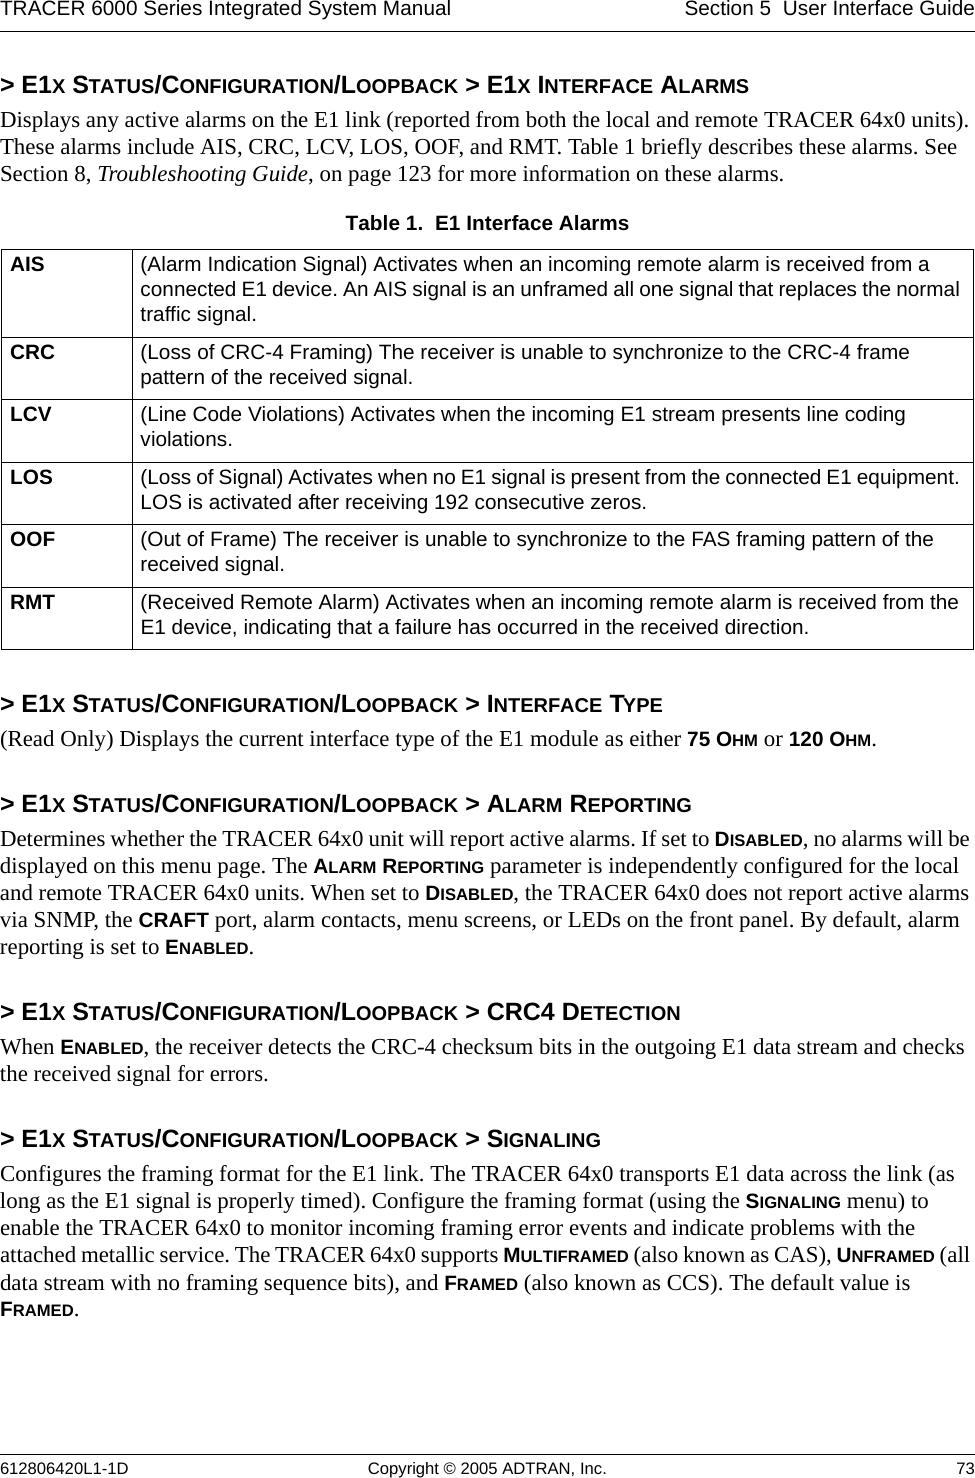 TRACER 6000 Series Integrated System Manual Section 5  User Interface Guide612806420L1-1D Copyright © 2005 ADTRAN, Inc. 73&gt; E1X STATUS/CONFIGURATION/LOOPBACK &gt; E1X INTERFACE ALARMSDisplays any active alarms on the E1 link (reported from both the local and remote TRACER 64x0 units). These alarms include AIS, CRC, LCV, LOS, OOF, and RMT. Table 1 briefly describes these alarms. See Section 8, Troubleshooting Guide, on page 123 for more information on these alarms.&gt; E1X STATUS/CONFIGURATION/LOOPBACK &gt; INTERFACE TYPE(Read Only) Displays the current interface type of the E1 module as either 75 OHM or 120 OHM.&gt; E1X STATUS/CONFIGURATION/LOOPBACK &gt; ALARM REPORTINGDetermines whether the TRACER 64x0 unit will report active alarms. If set to DISABLED, no alarms will be displayed on this menu page. The ALARM REPORTING parameter is independently configured for the local and remote TRACER 64x0 units. When set to DISABLED, the TRACER 64x0 does not report active alarms via SNMP, the CRAFT port, alarm contacts, menu screens, or LEDs on the front panel. By default, alarm reporting is set to ENABLED.&gt; E1X STATUS/CONFIGURATION/LOOPBACK &gt; CRC4 DETECTIONWhen ENABLED, the receiver detects the CRC-4 checksum bits in the outgoing E1 data stream and checks the received signal for errors.&gt; E1X STATUS/CONFIGURATION/LOOPBACK &gt; SIGNALINGConfigures the framing format for the E1 link. The TRACER 64x0 transports E1 data across the link (as long as the E1 signal is properly timed). Configure the framing format (using the SIGNALING menu) to enable the TRACER 64x0 to monitor incoming framing error events and indicate problems with the attached metallic service. The TRACER 64x0 supports MULTIFRAMED (also known as CAS), UNFRAMED (all data stream with no framing sequence bits), and FRAMED (also known as CCS). The default value is FRAMED.Table 1.  E1 Interface Alarms AIS (Alarm Indication Signal) Activates when an incoming remote alarm is received from a connected E1 device. An AIS signal is an unframed all one signal that replaces the normal traffic signal.CRC (Loss of CRC-4 Framing) The receiver is unable to synchronize to the CRC-4 frame pattern of the received signal.LCV (Line Code Violations) Activates when the incoming E1 stream presents line coding violations.LOS (Loss of Signal) Activates when no E1 signal is present from the connected E1 equipment. LOS is activated after receiving 192 consecutive zeros.OOF (Out of Frame) The receiver is unable to synchronize to the FAS framing pattern of the received signal.RMT (Received Remote Alarm) Activates when an incoming remote alarm is received from the E1 device, indicating that a failure has occurred in the received direction.